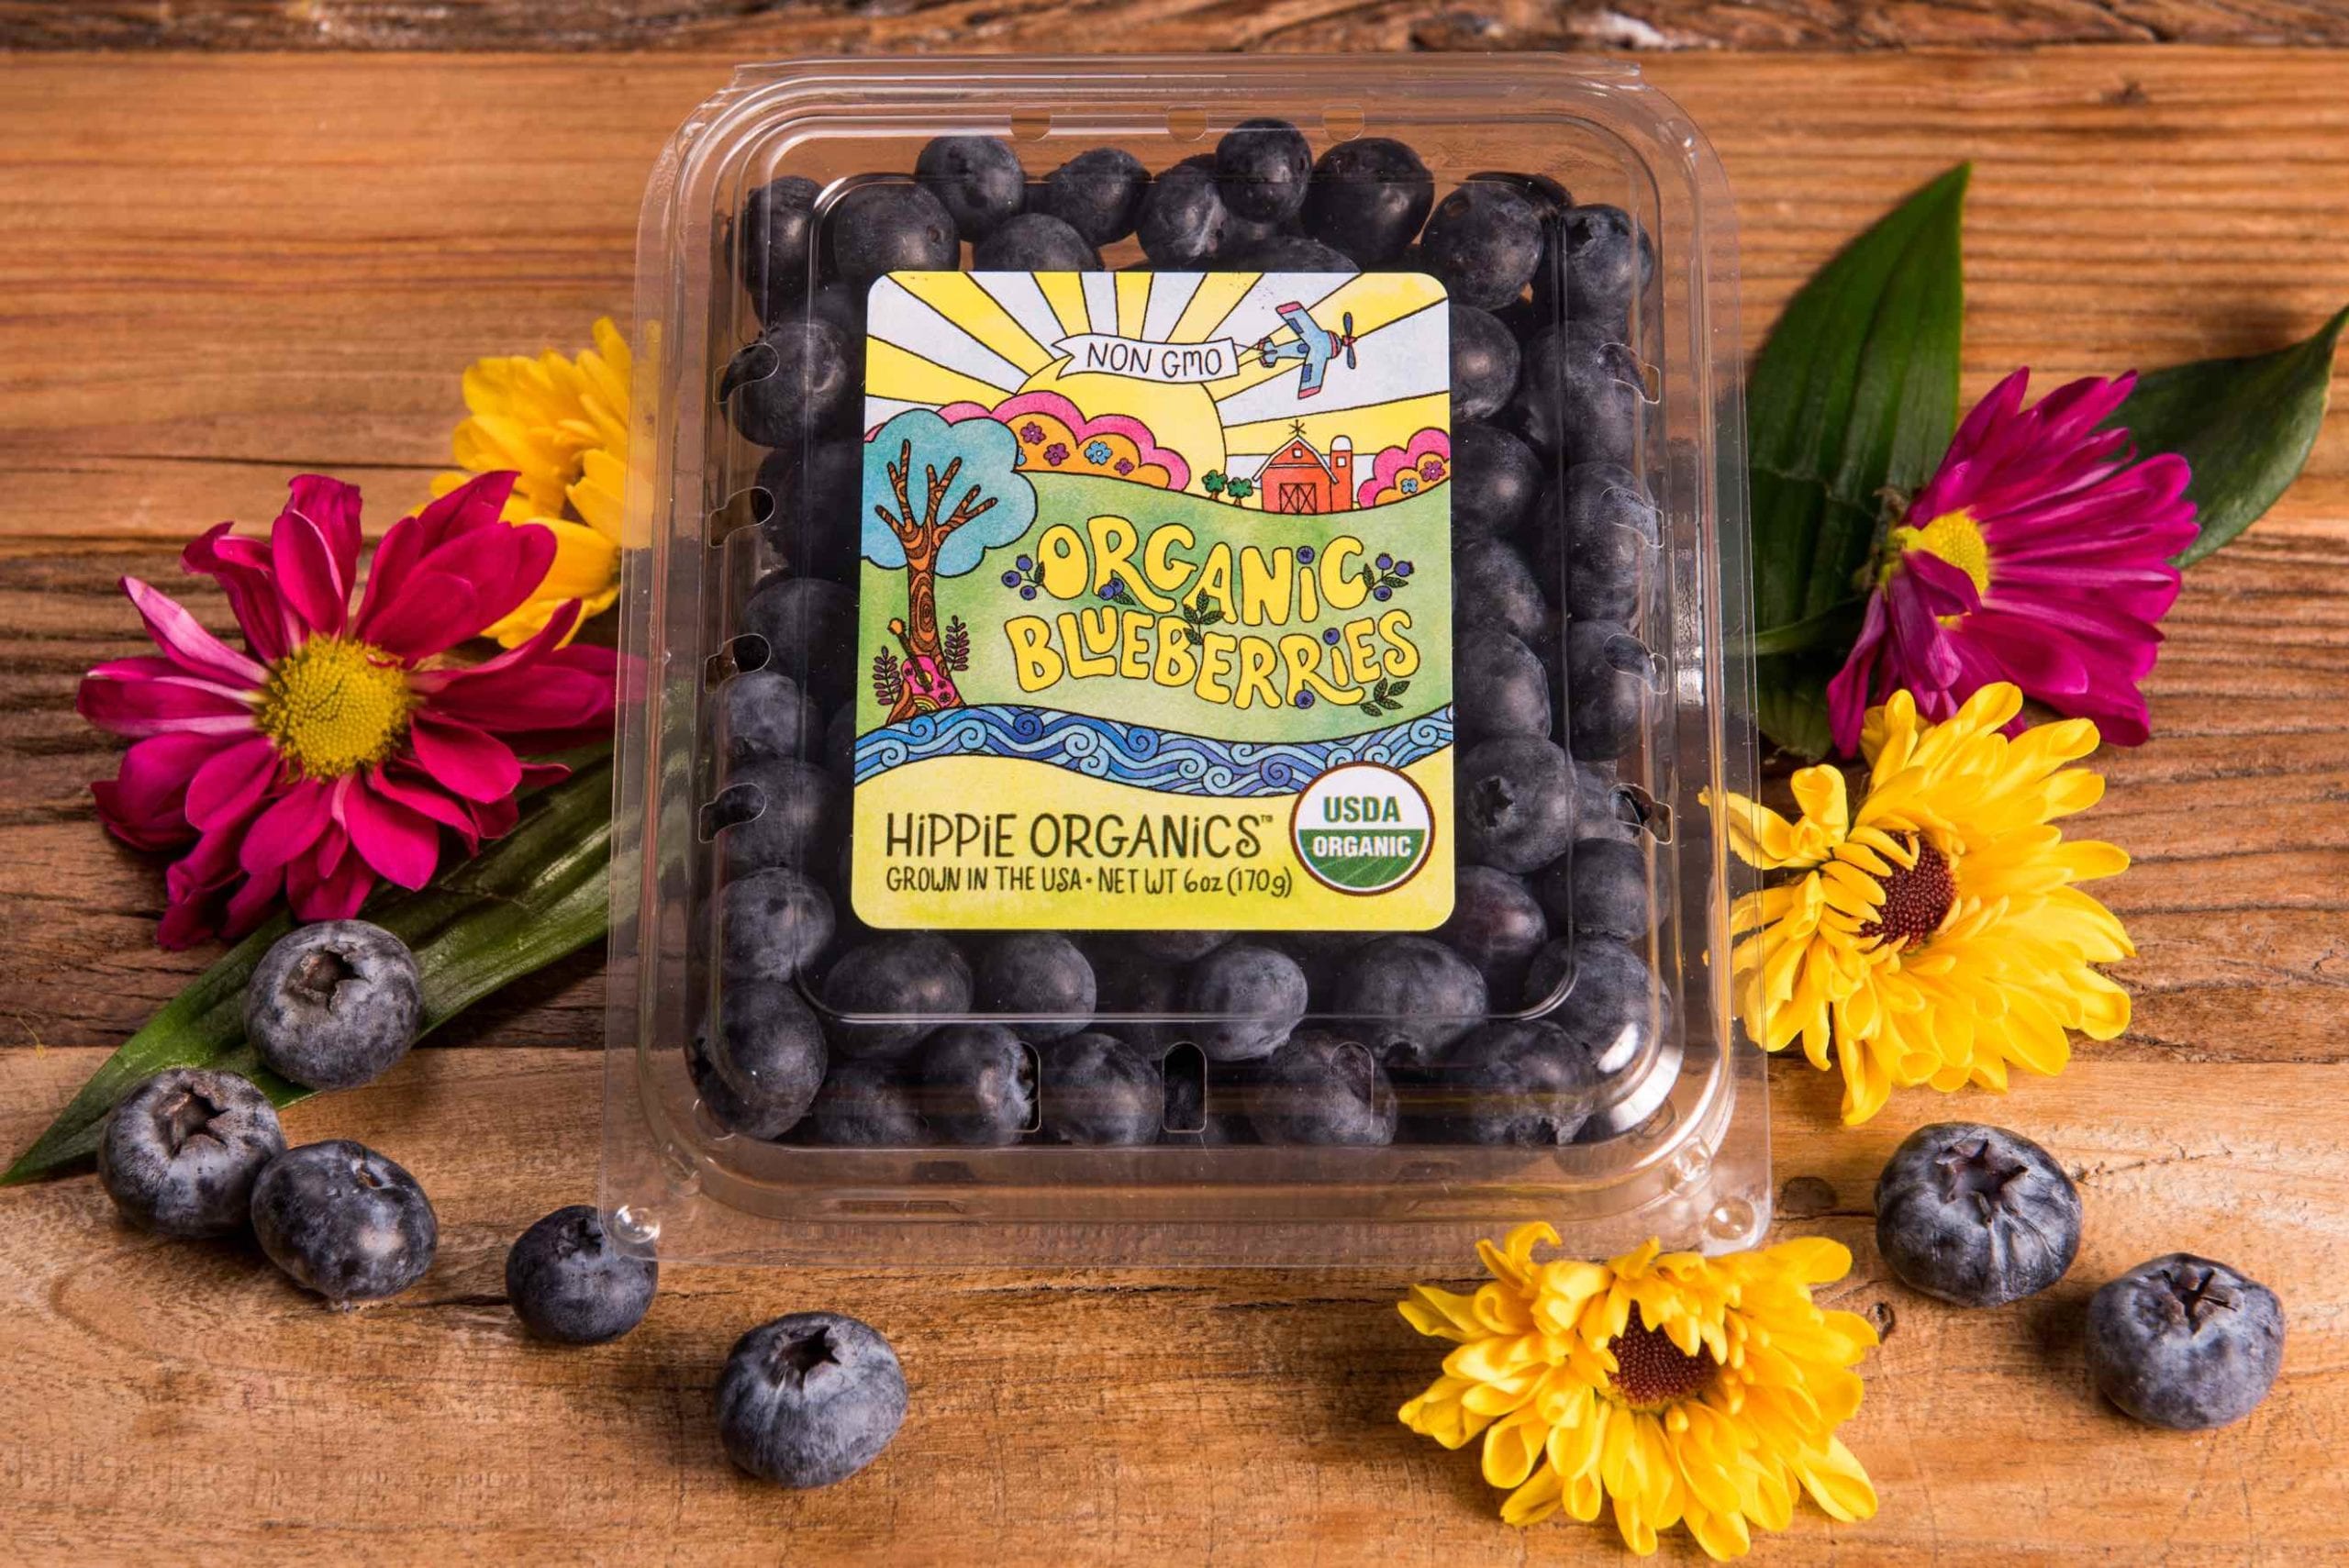 Aerial closeup view of package of organic blueberries surrounded by flowers